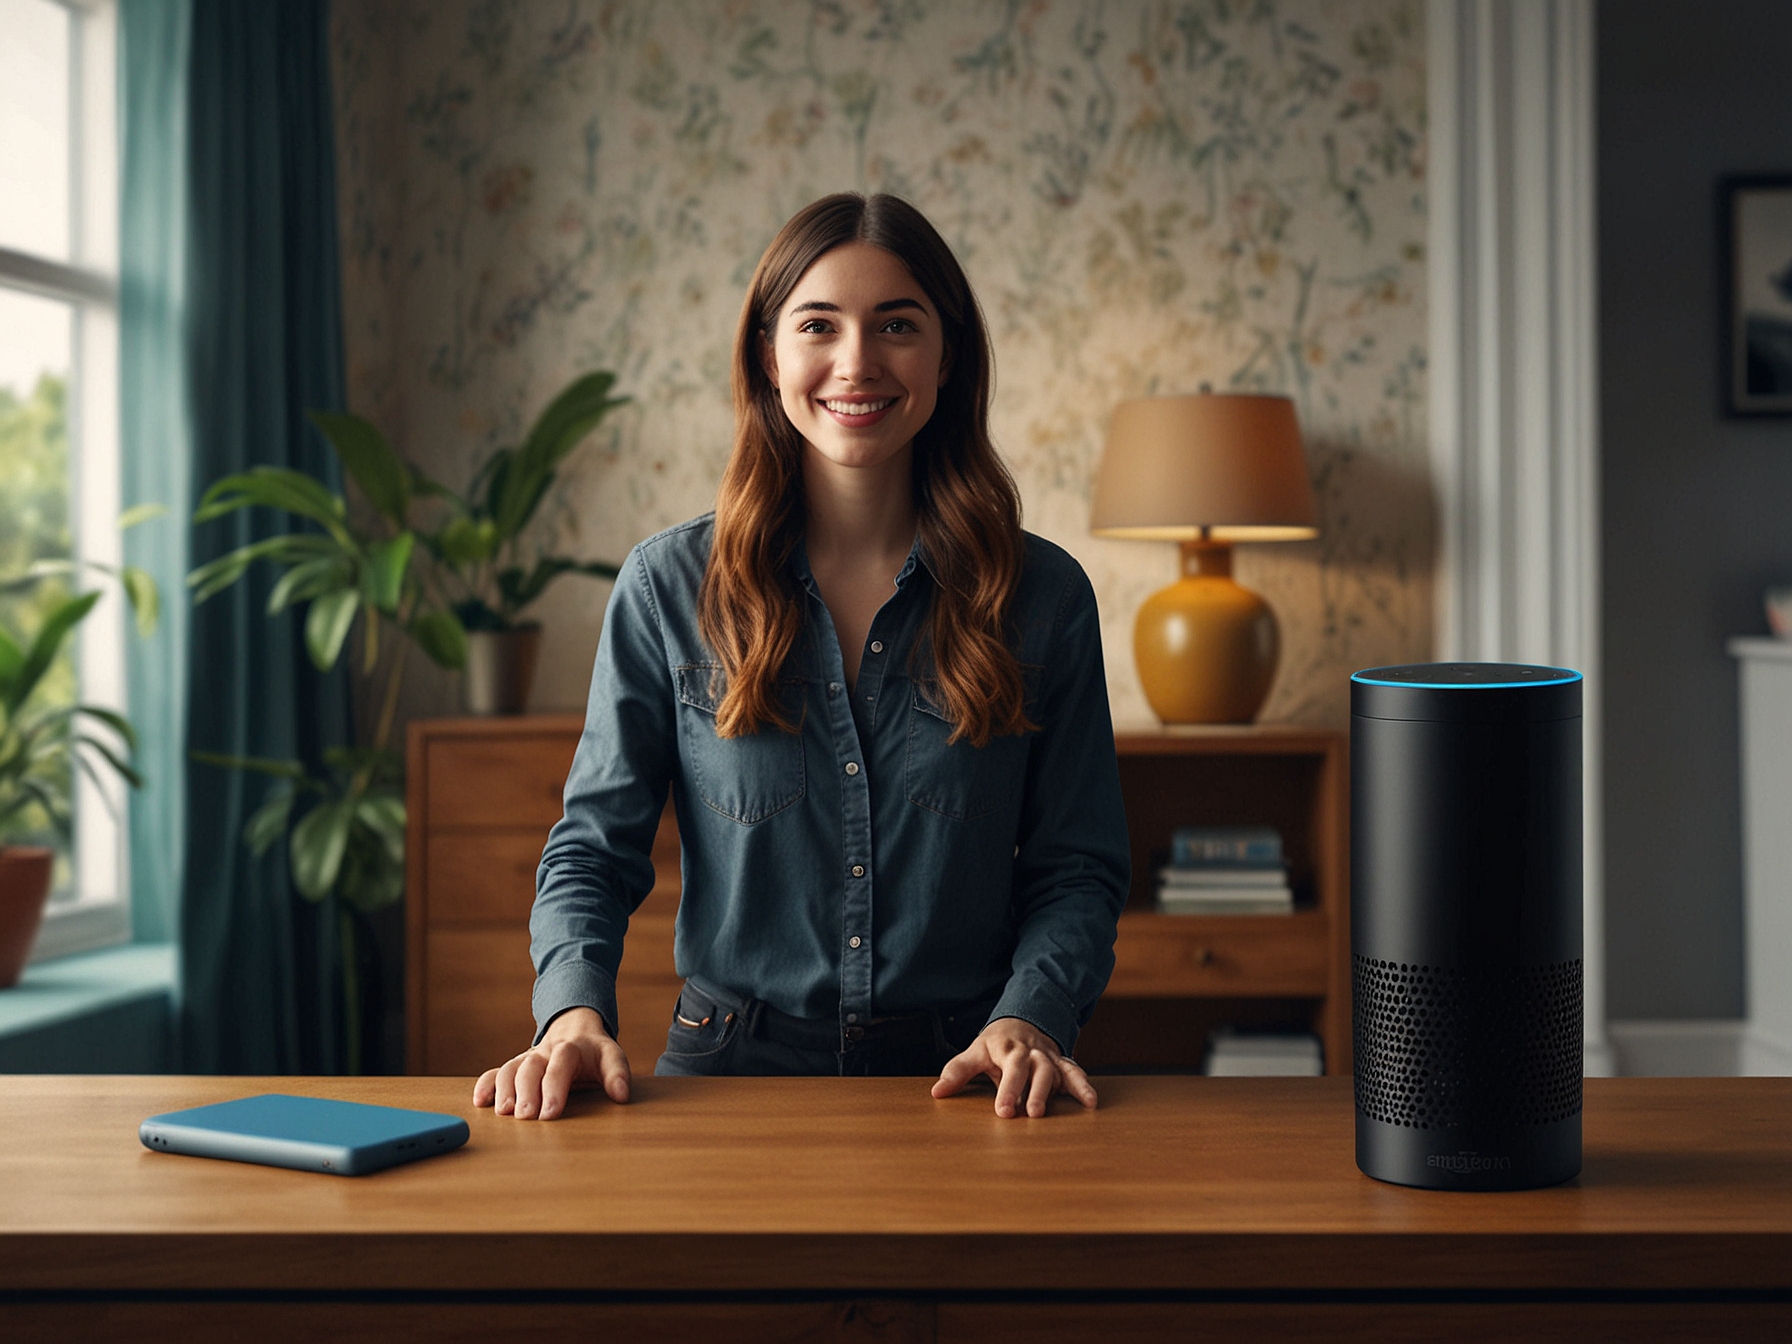 Illustration of a user interacting with an Amazon Alexa device, highlighting the potential shift to a subscription-based service requiring users to pay up to $10 monthly.